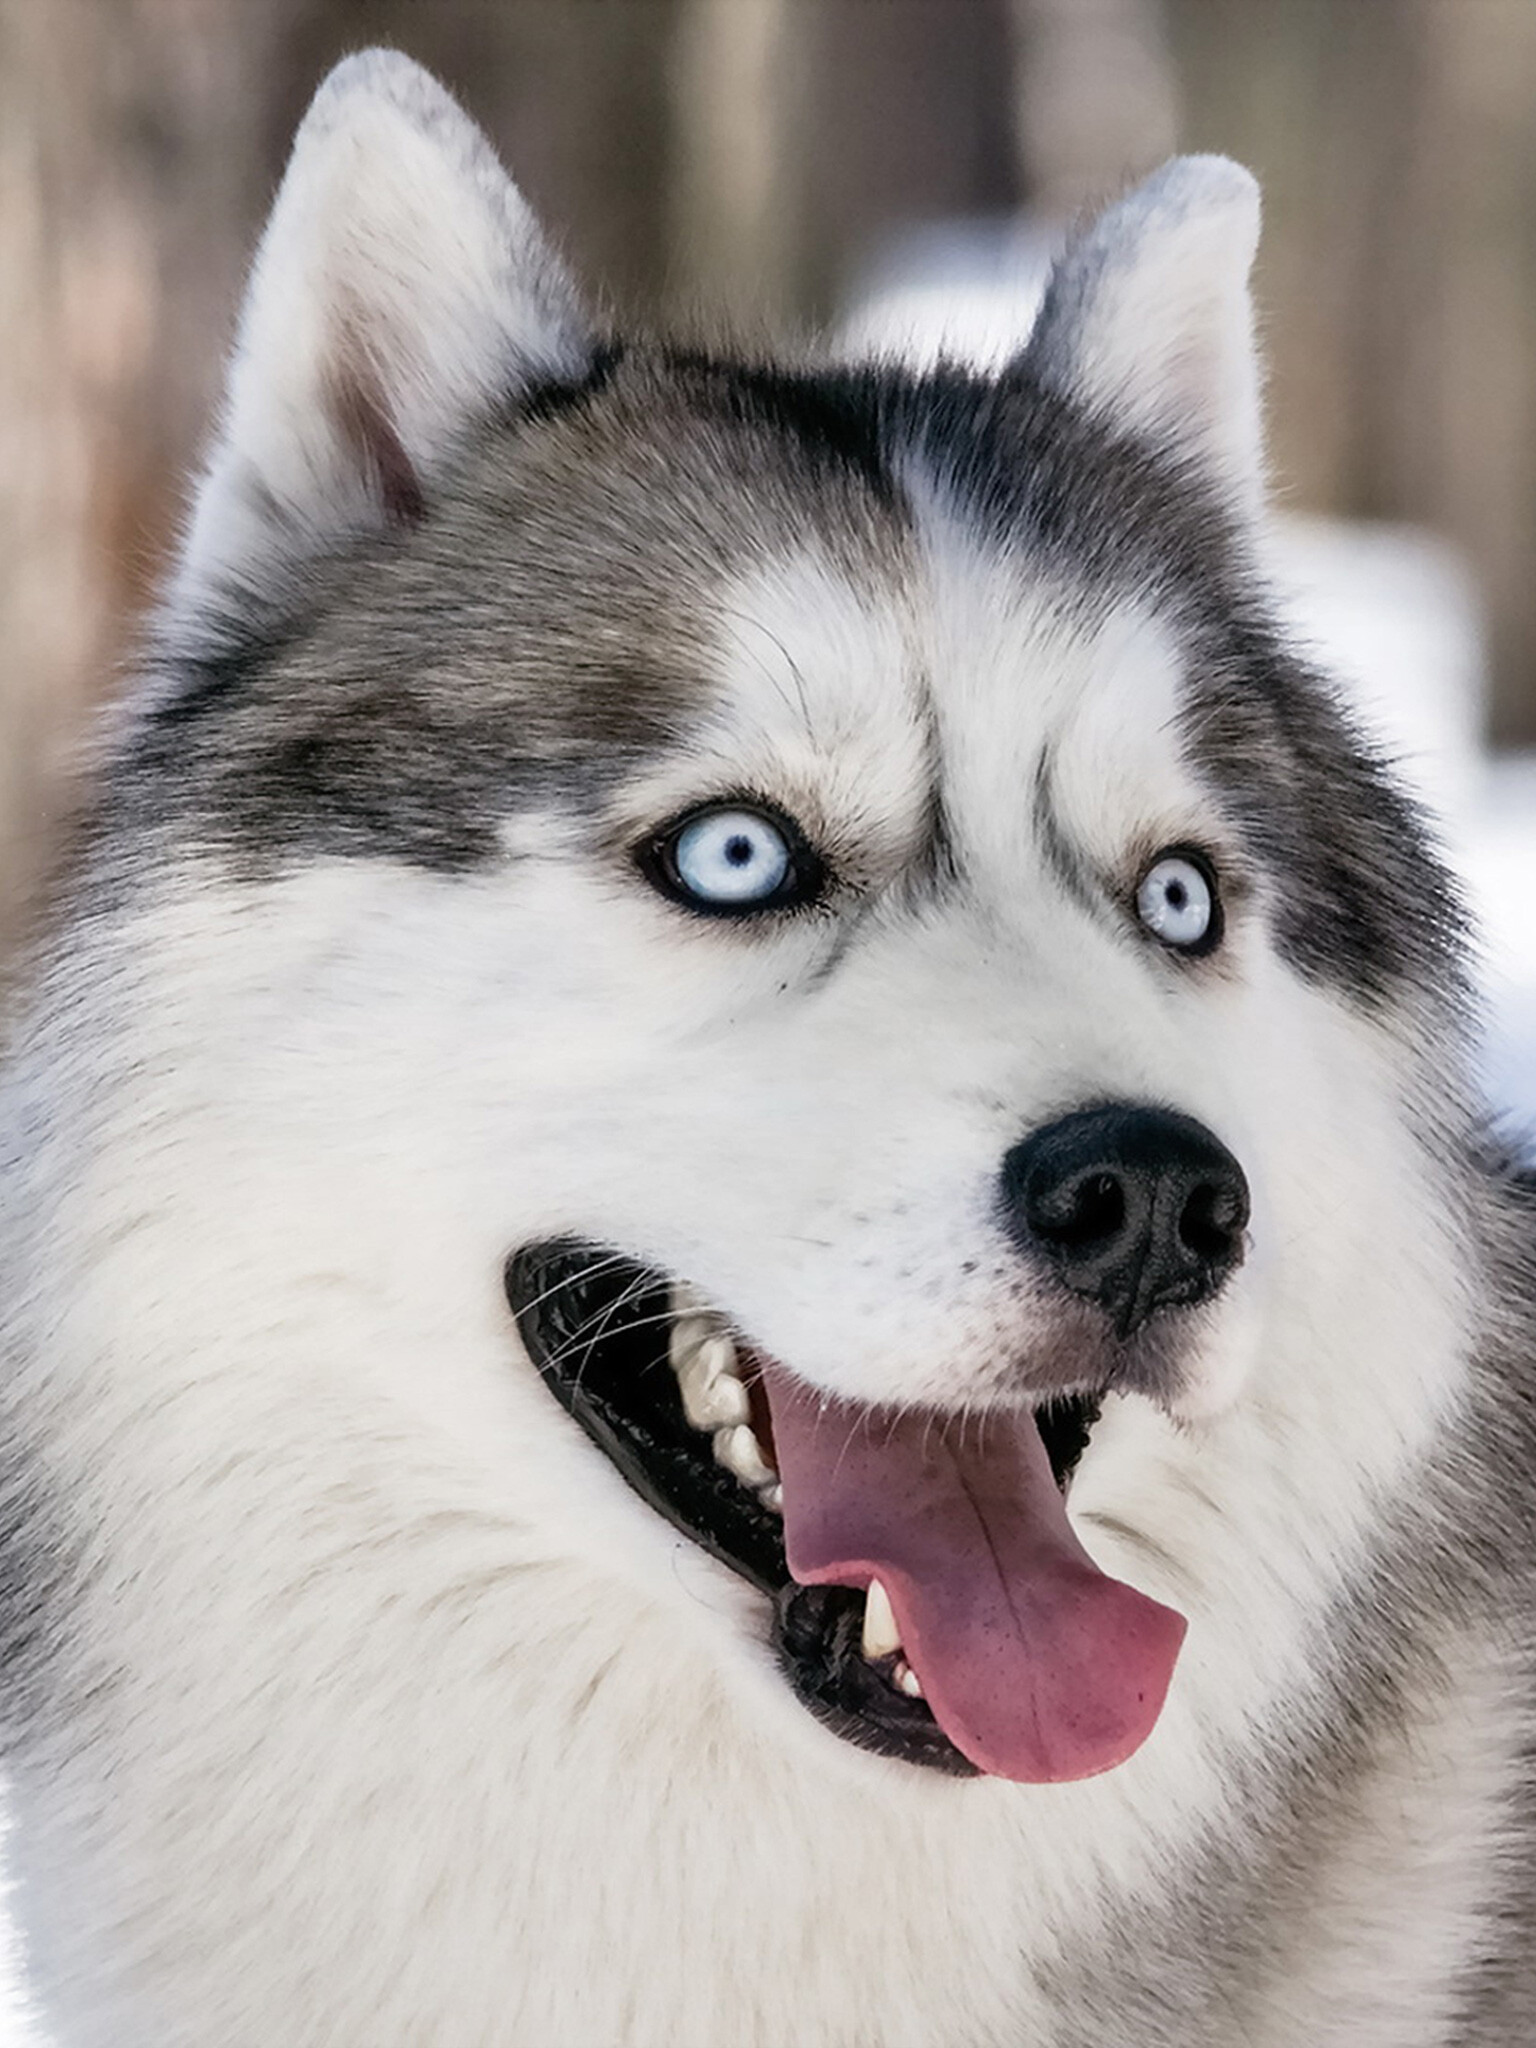 Siberian Husky: Ranked 77th out of 138 compared breeds for their intelligence by canine psychologist Stanley Coren. 1540x2050 HD Background.